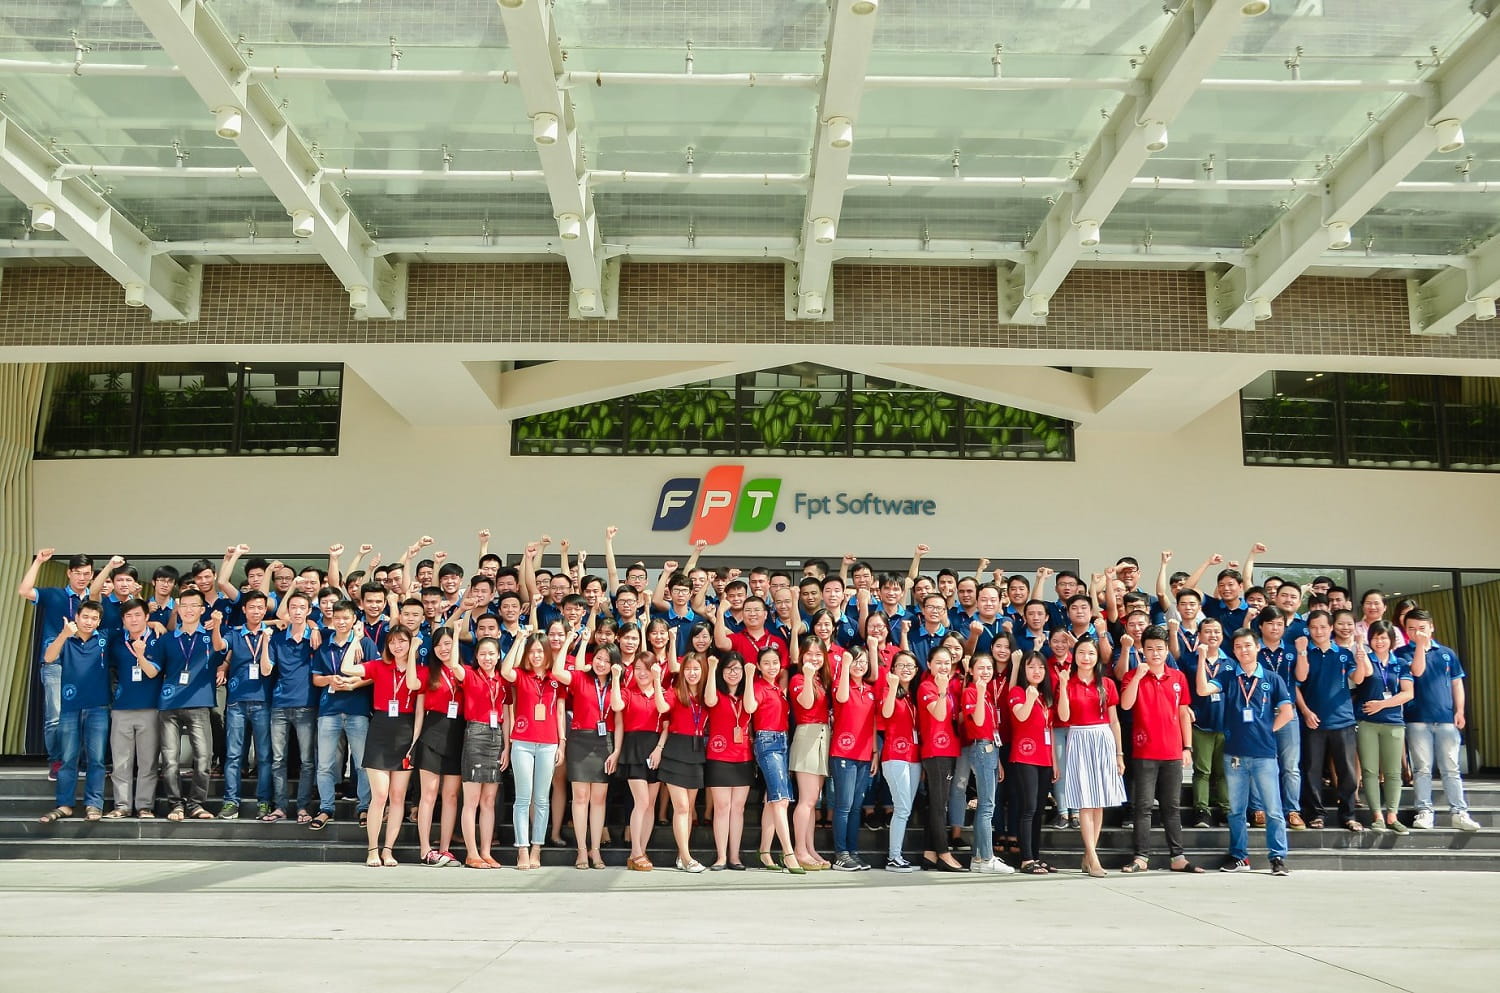 FPT Complex has nearly 6,000 software employees